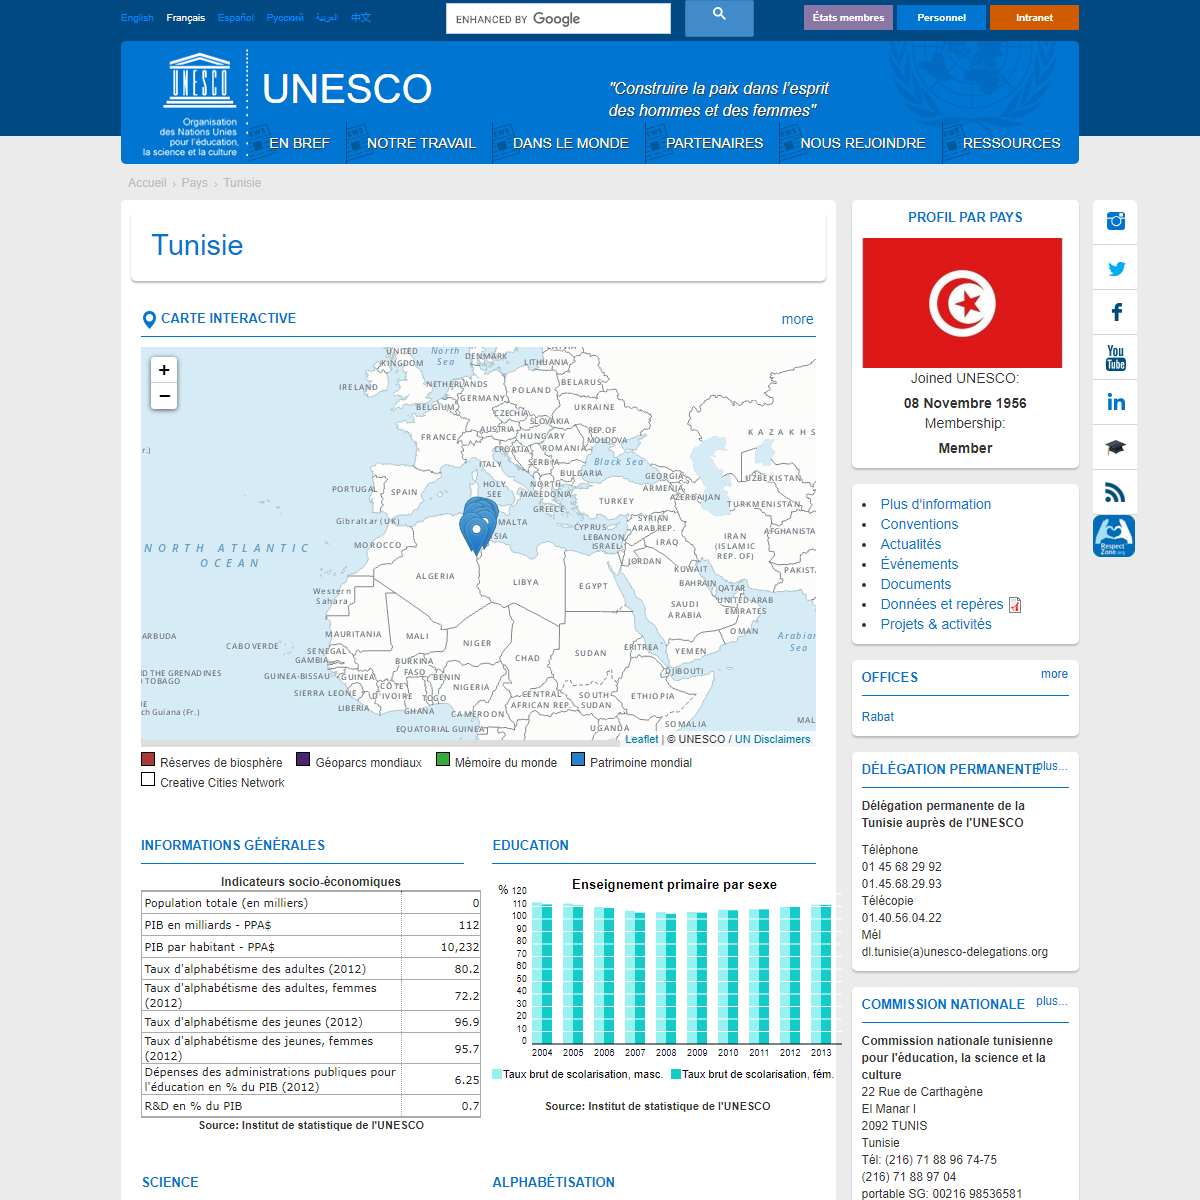 A complete backup of https://fr.unesco.org/countries/tunisie